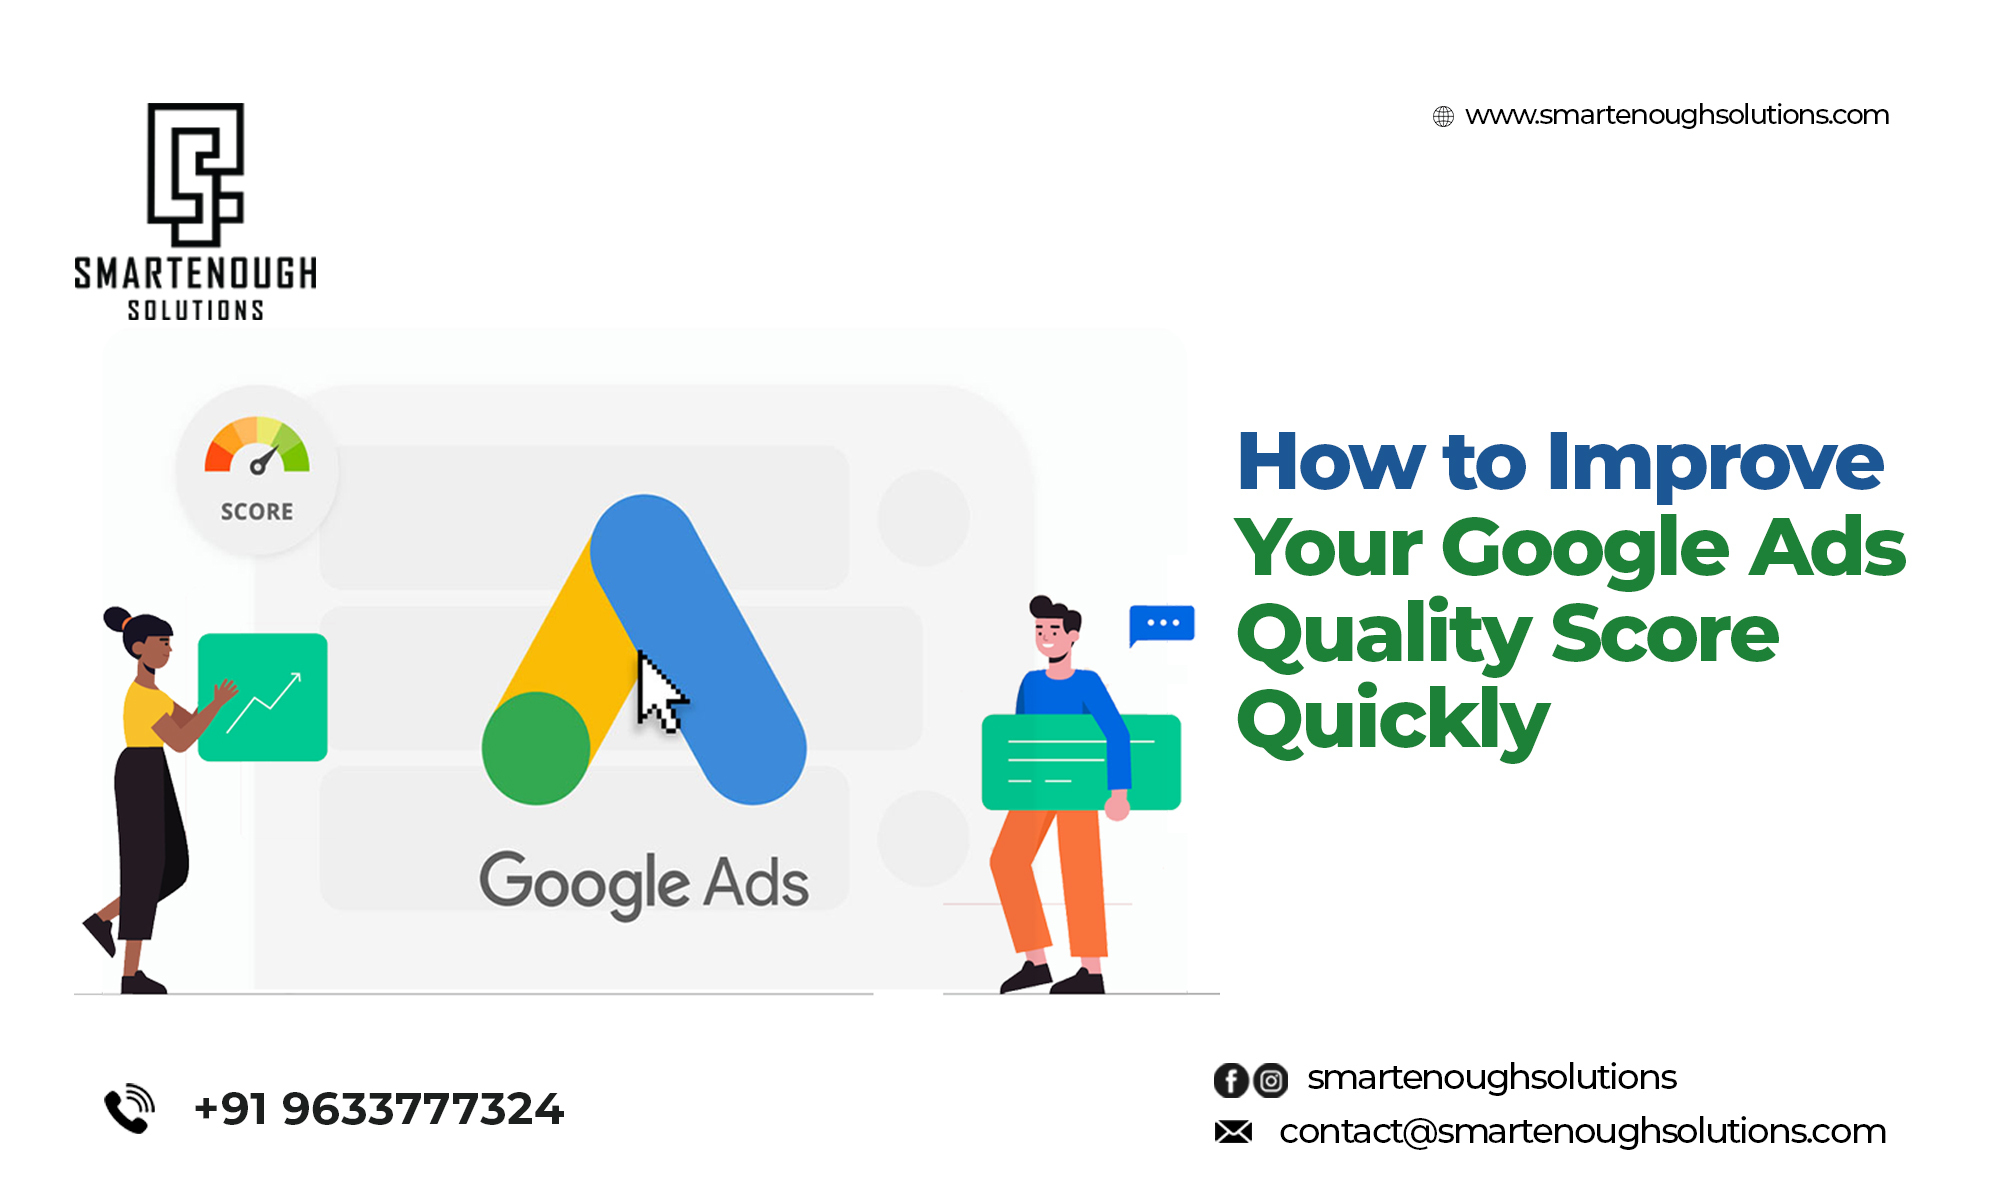  How to Improve Your Google Ads Quality Score Quickly